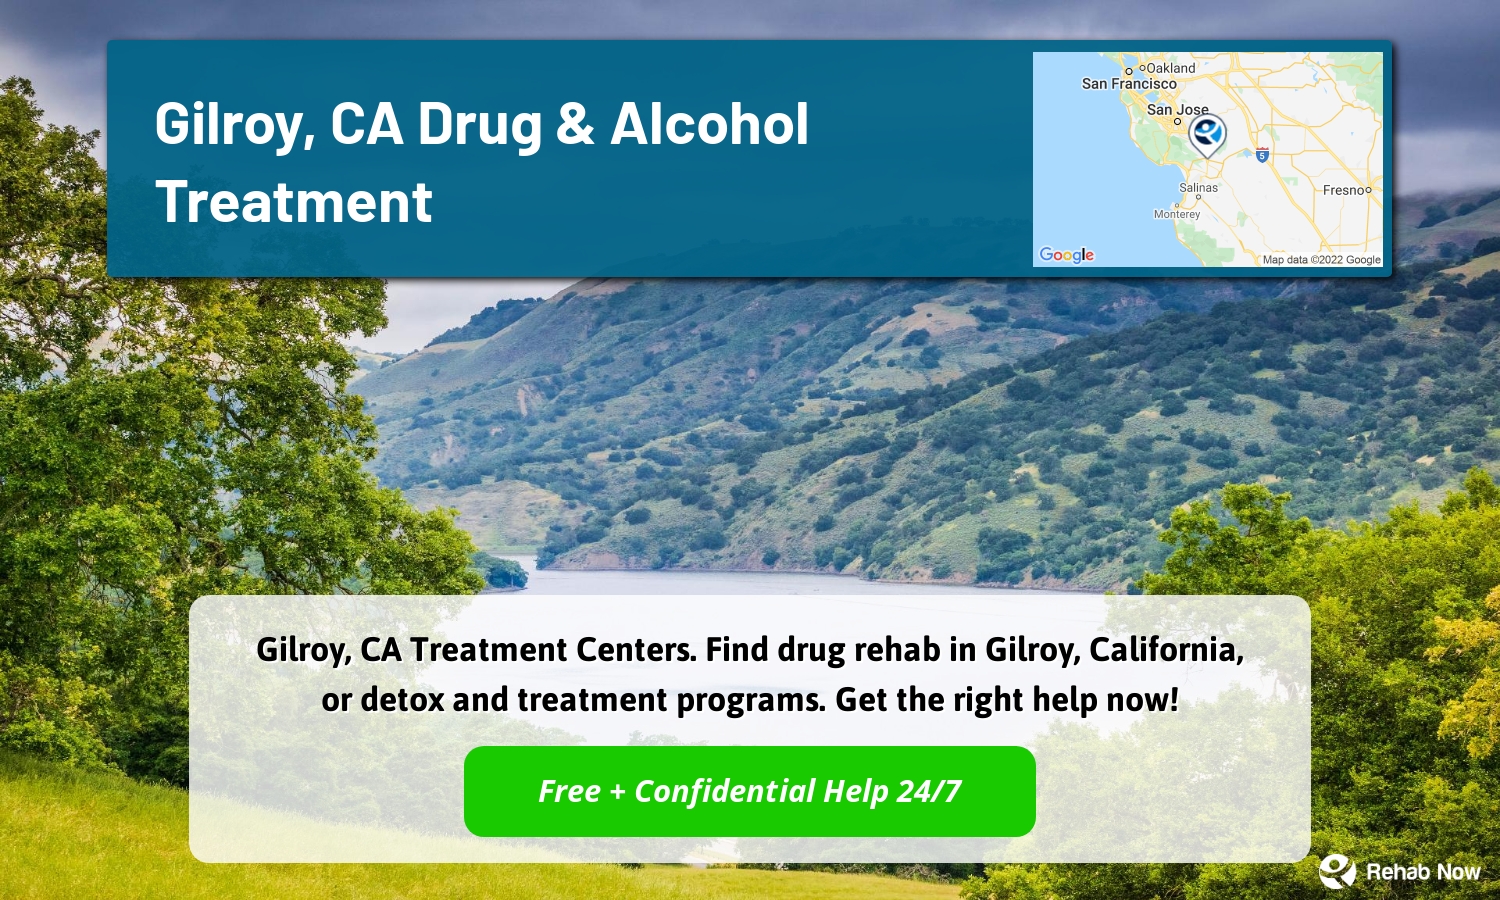 Gilroy, CA Treatment Centers. Find drug rehab in Gilroy, California, or detox and treatment programs. Get the right help now!